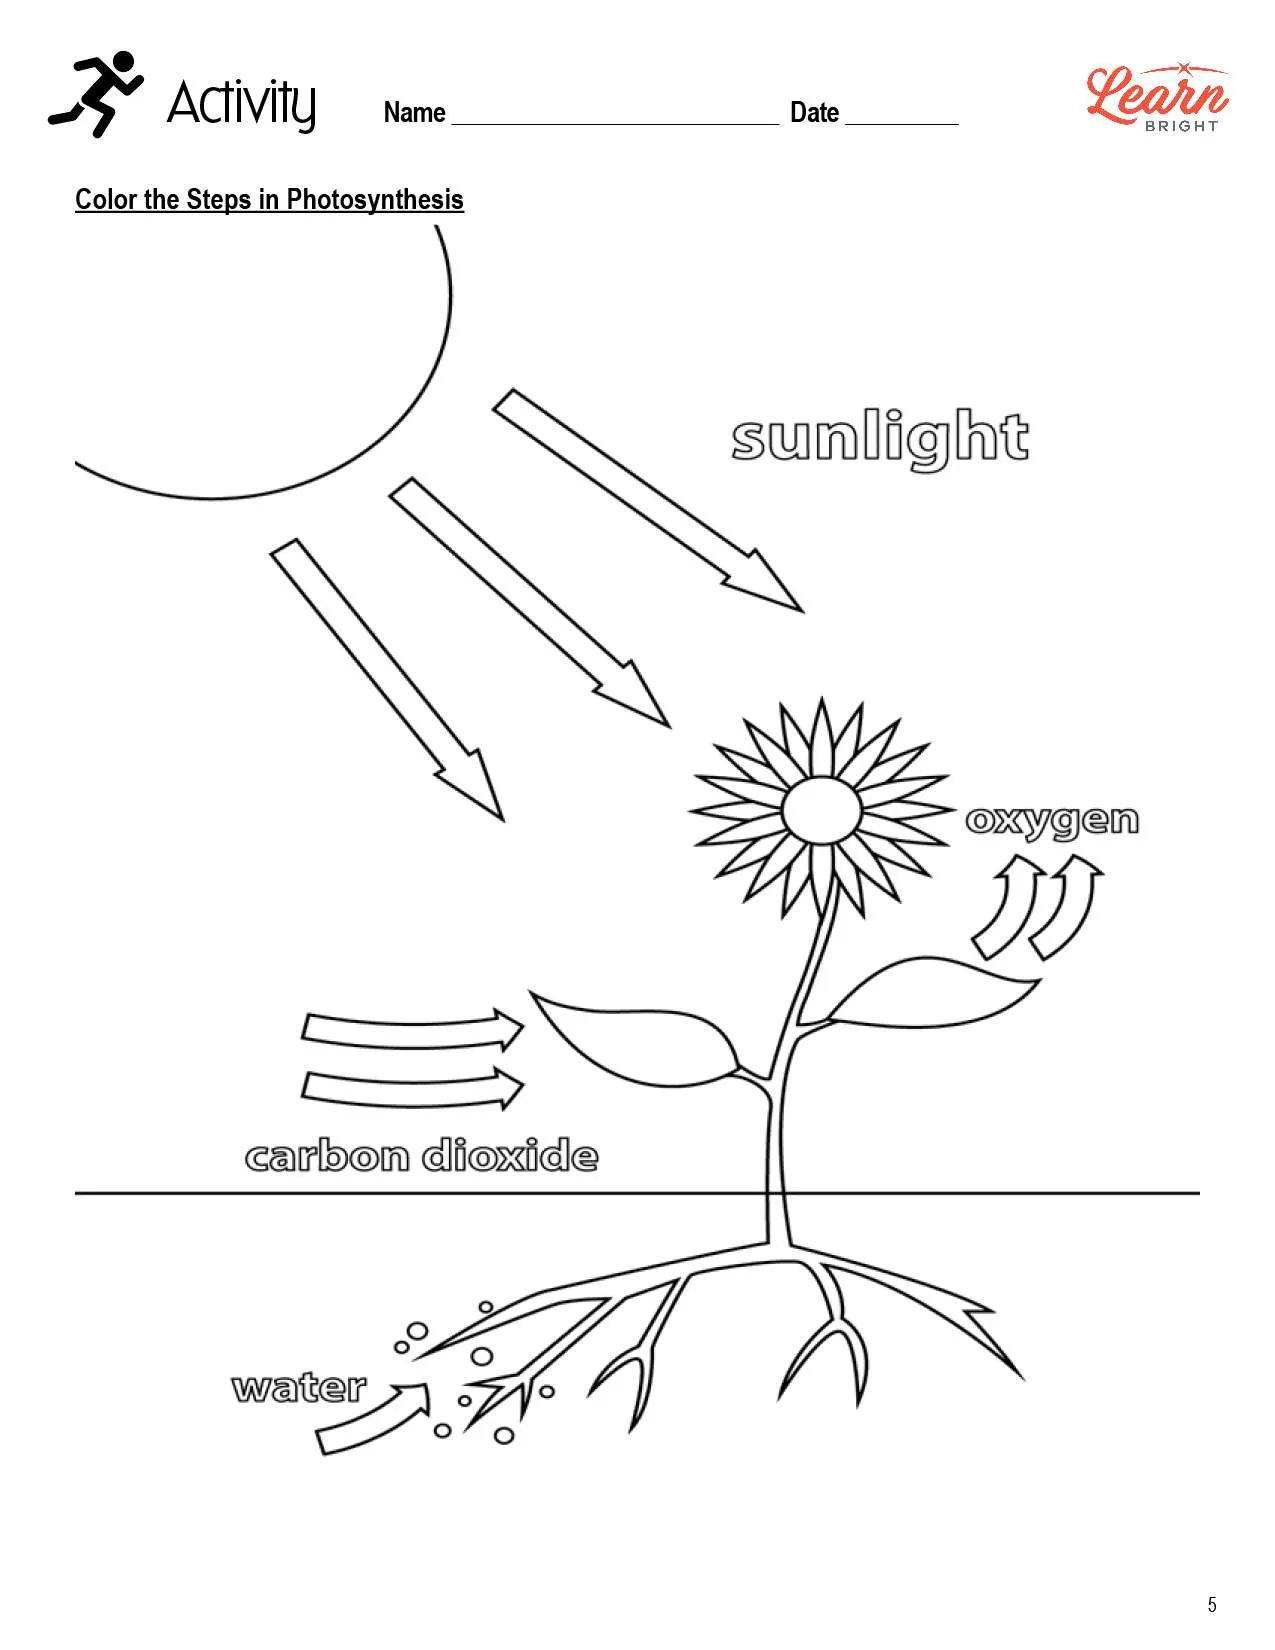 photosynthesis-worksheets